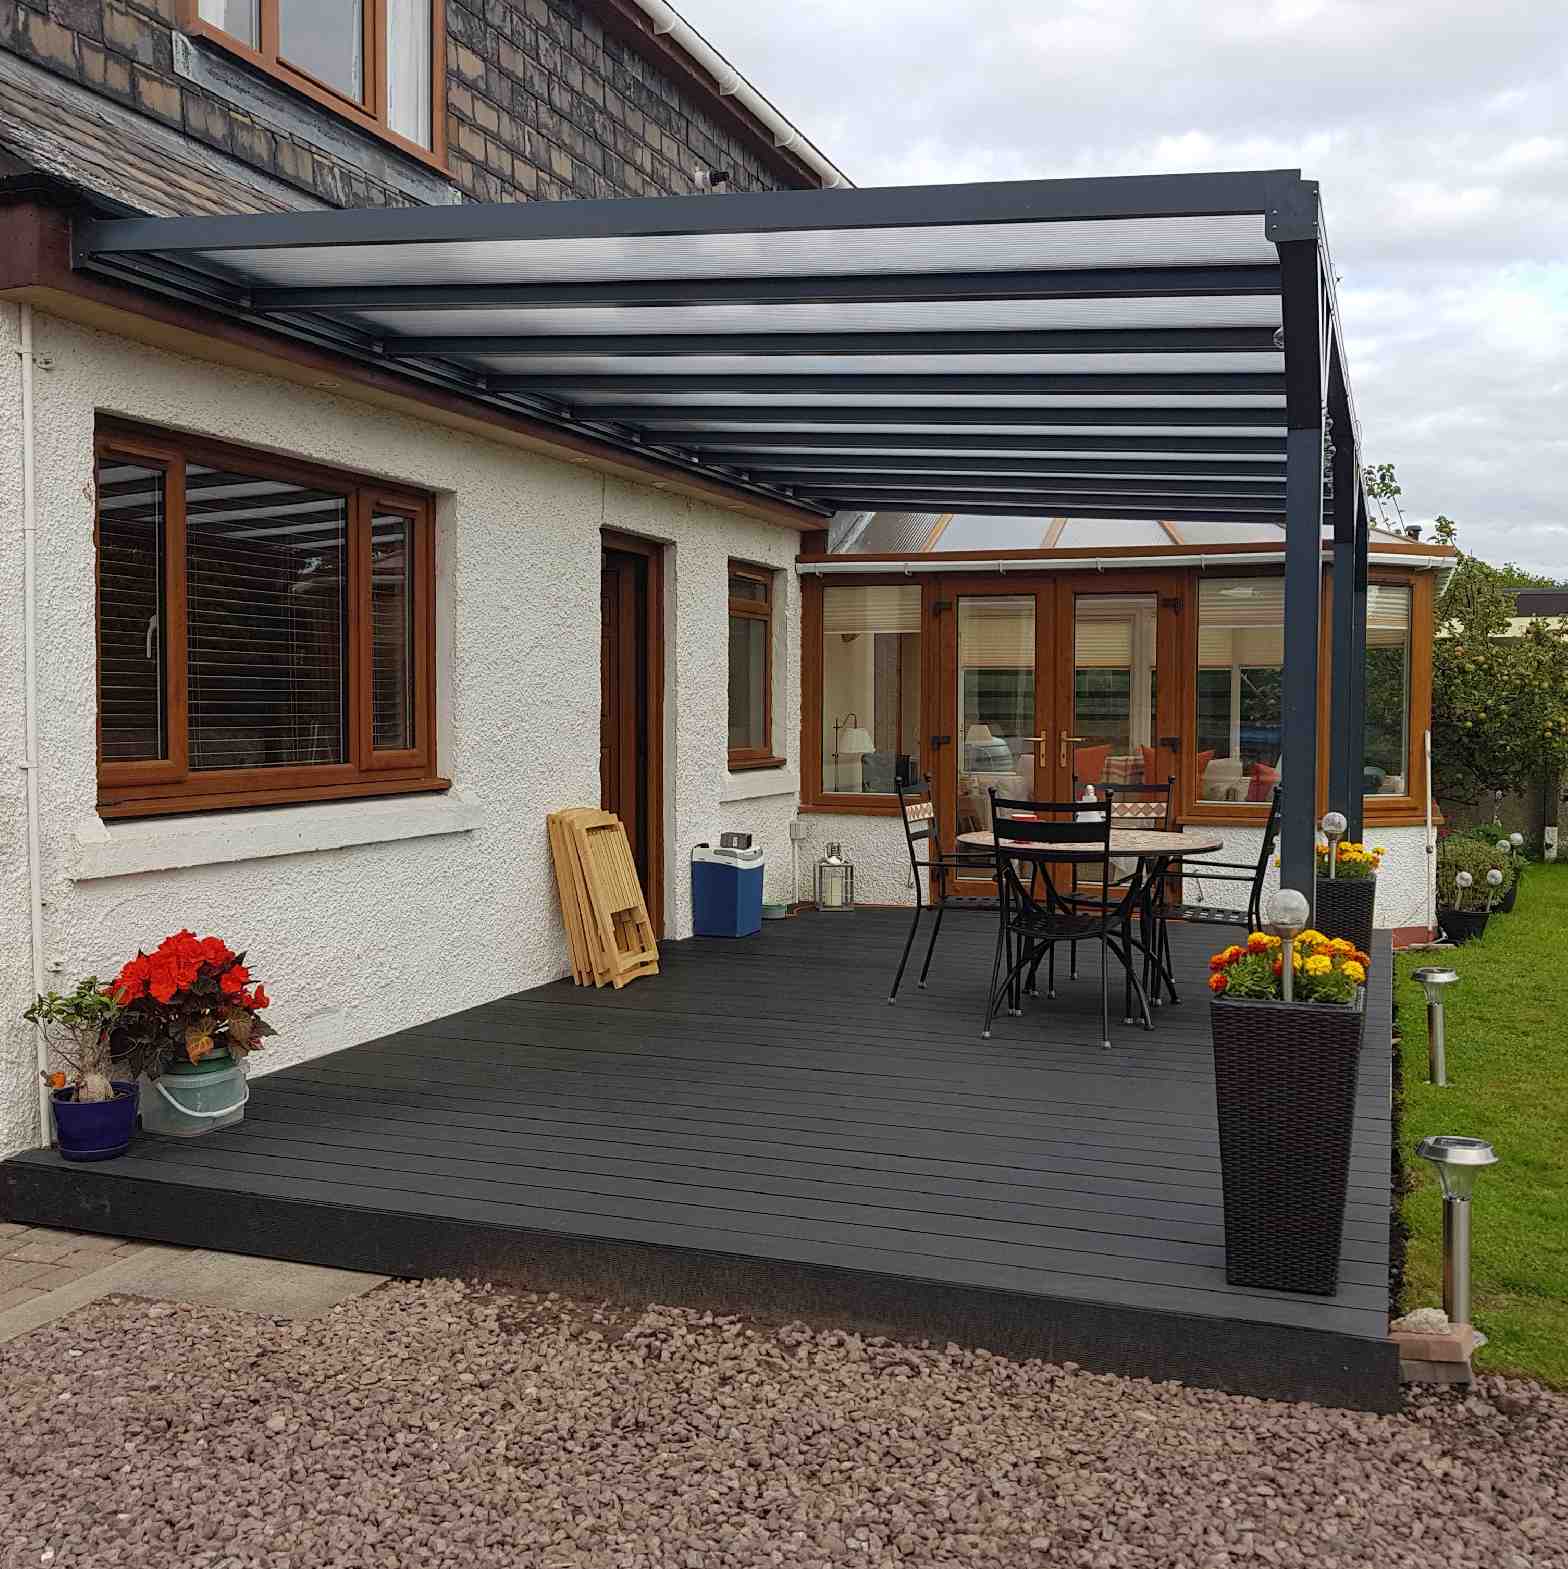 Buy Omega Verandah, Anthracite Grey, 16mm Polycarbonate Glazing - 8.4m (W) x 1.5m (P), (4) Supporting Posts online today